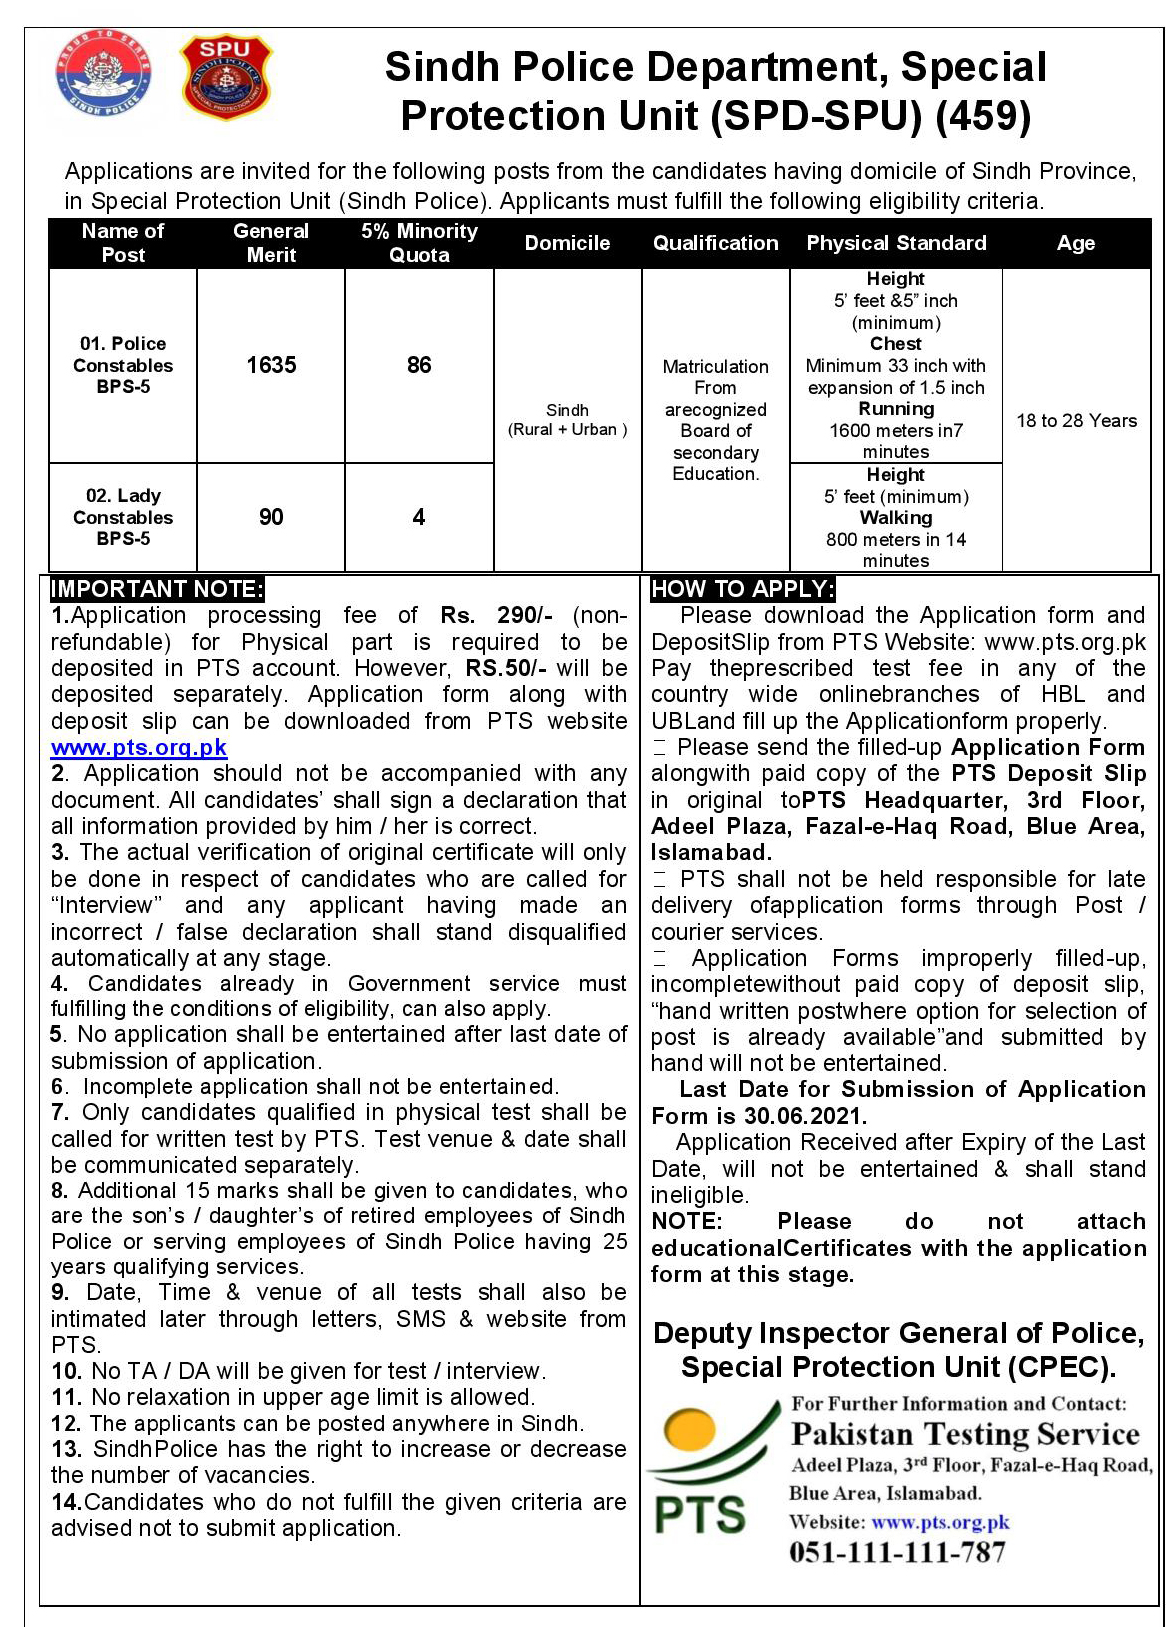 Sindh Police Jobs 2021 Special Protection Unit SPU for Police Constables and Lady Constables - Apply Online via www.pts.org.pk